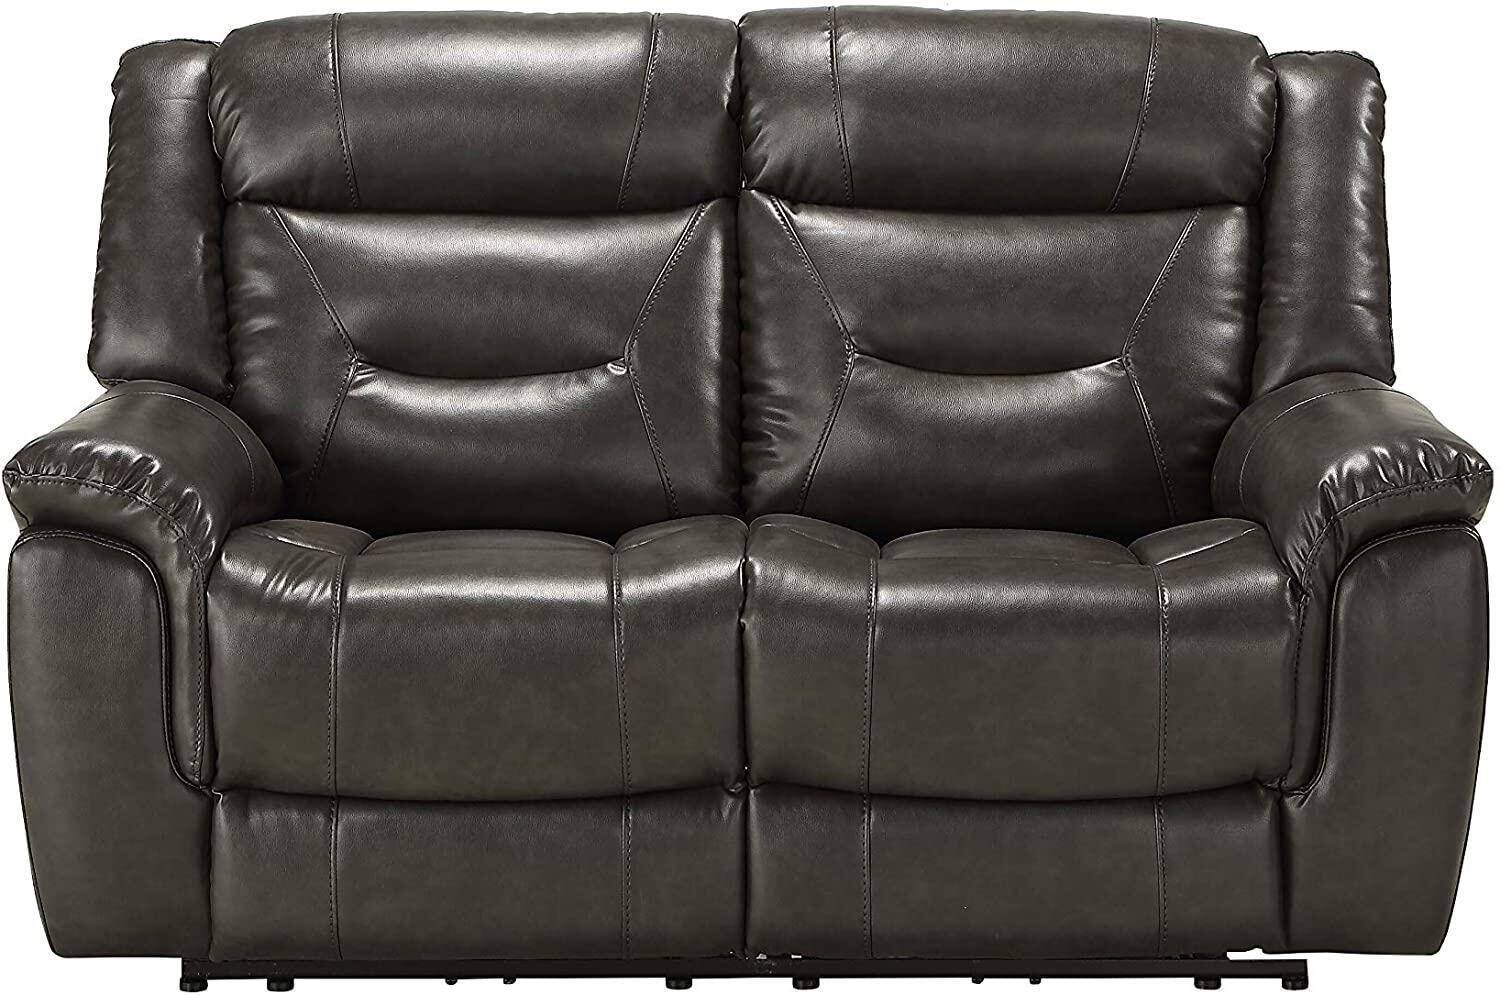 

    
Contemporary Gray Leather Loveseat by Acme Imogen 54806
